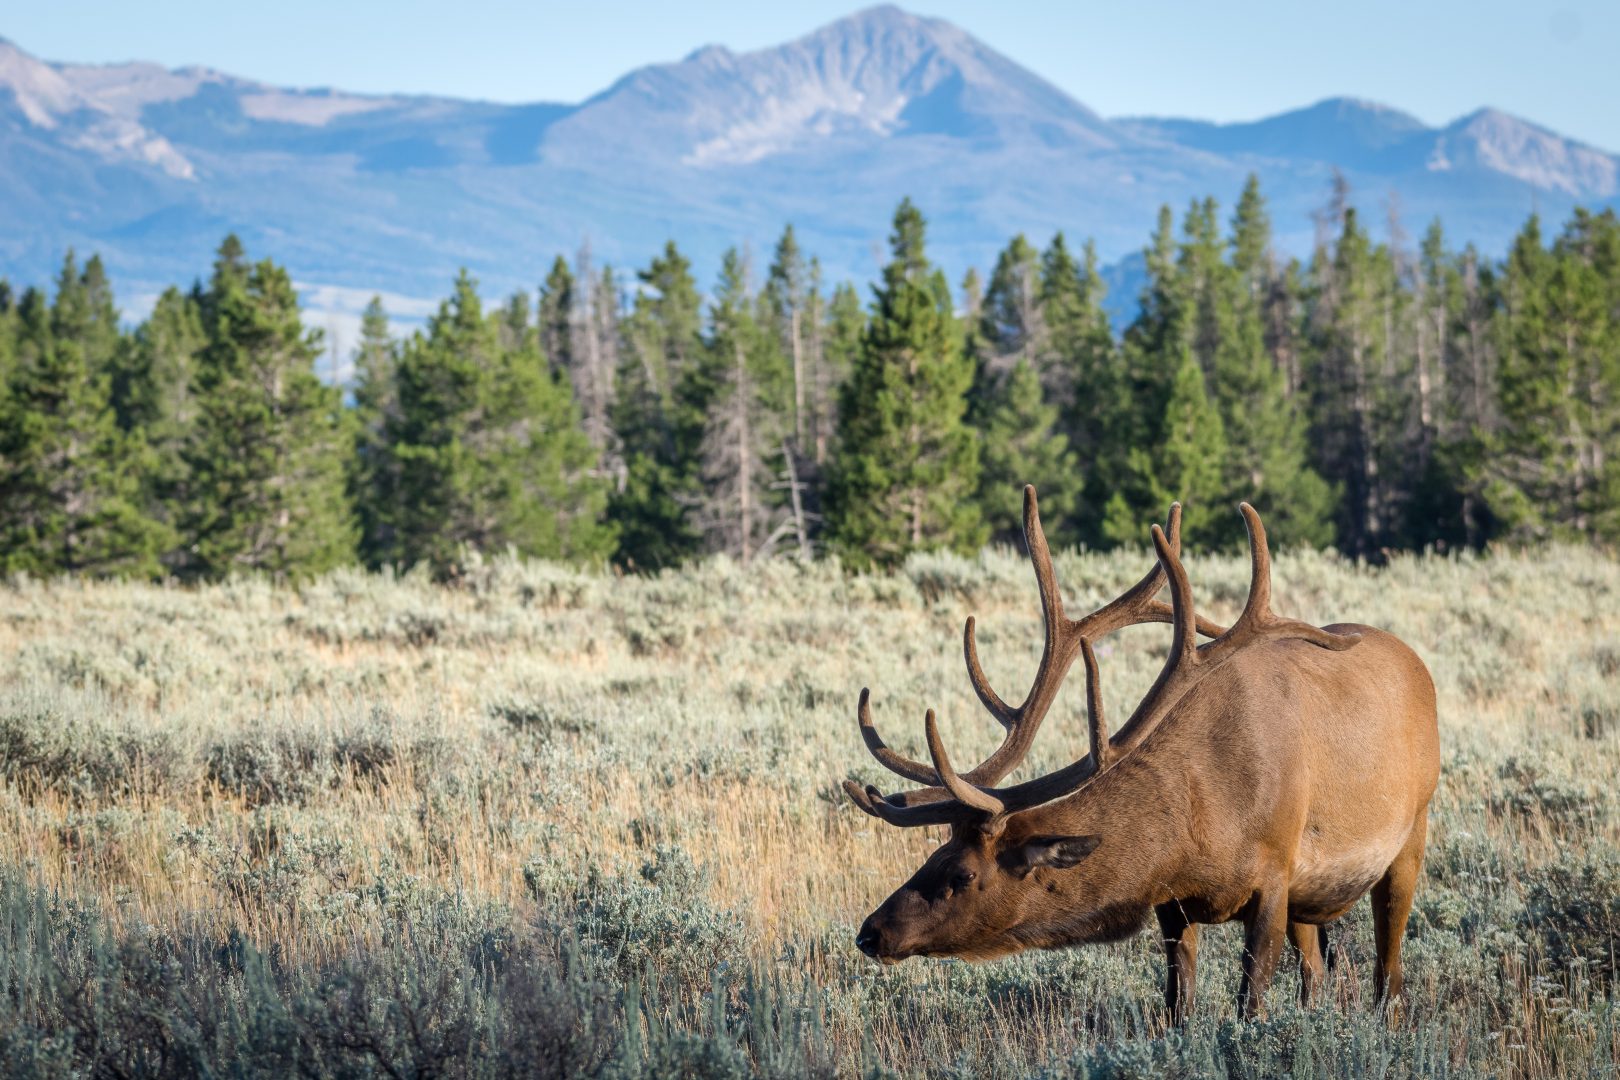 large elk in field with pine trees and mountains in background